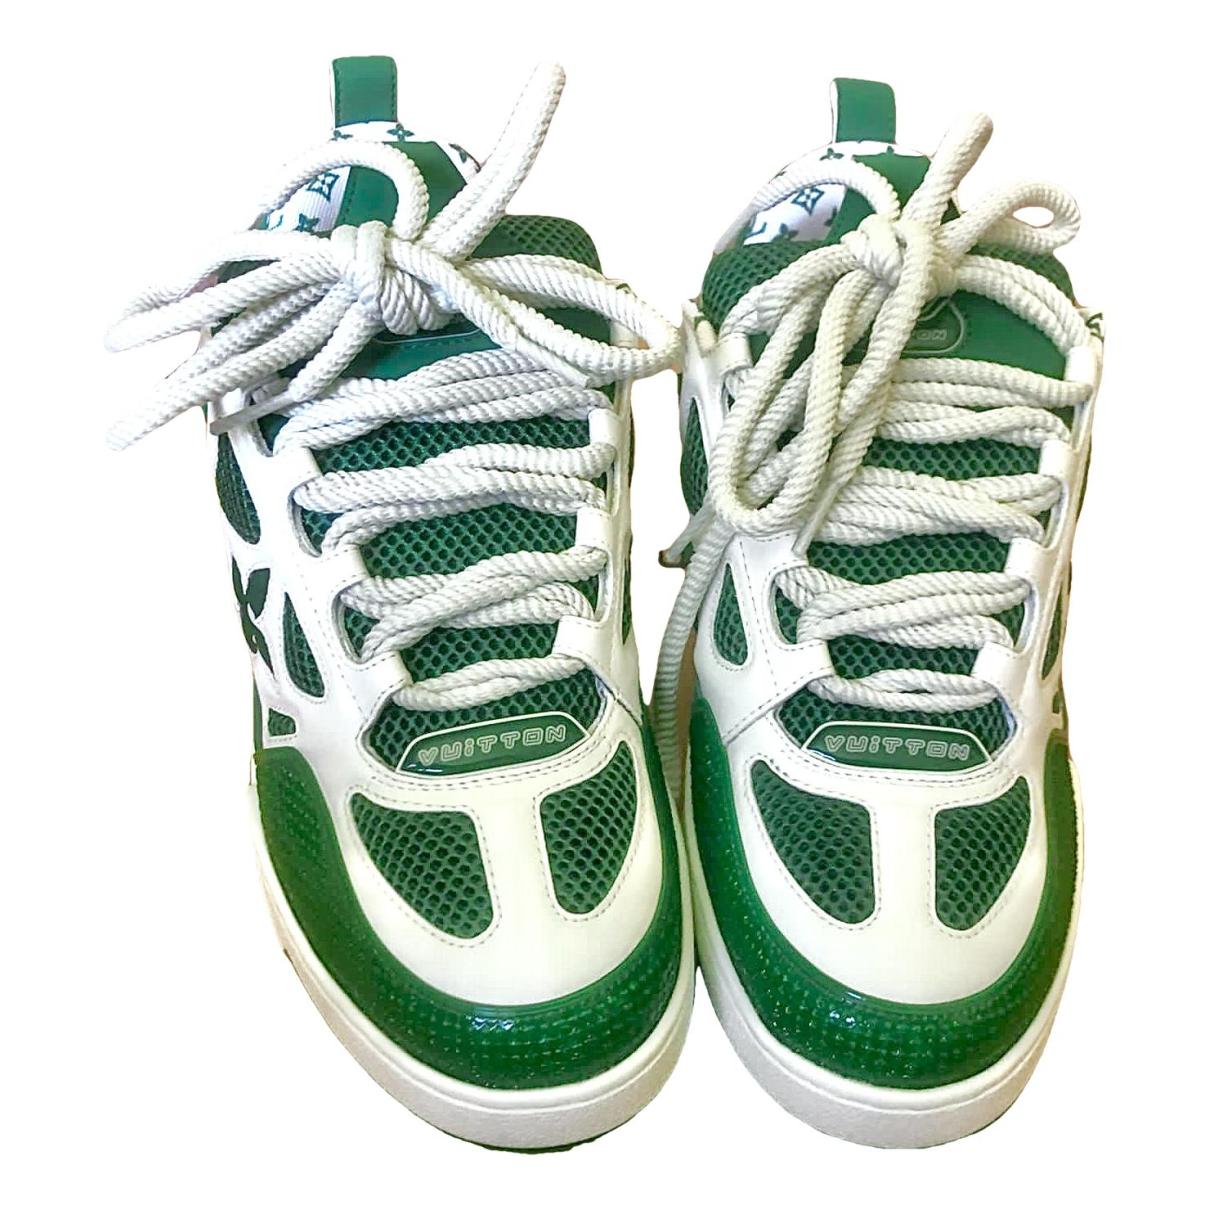 Lv trainer leather high trainers Louis Vuitton Green size 9 UK in Leather -  19155755